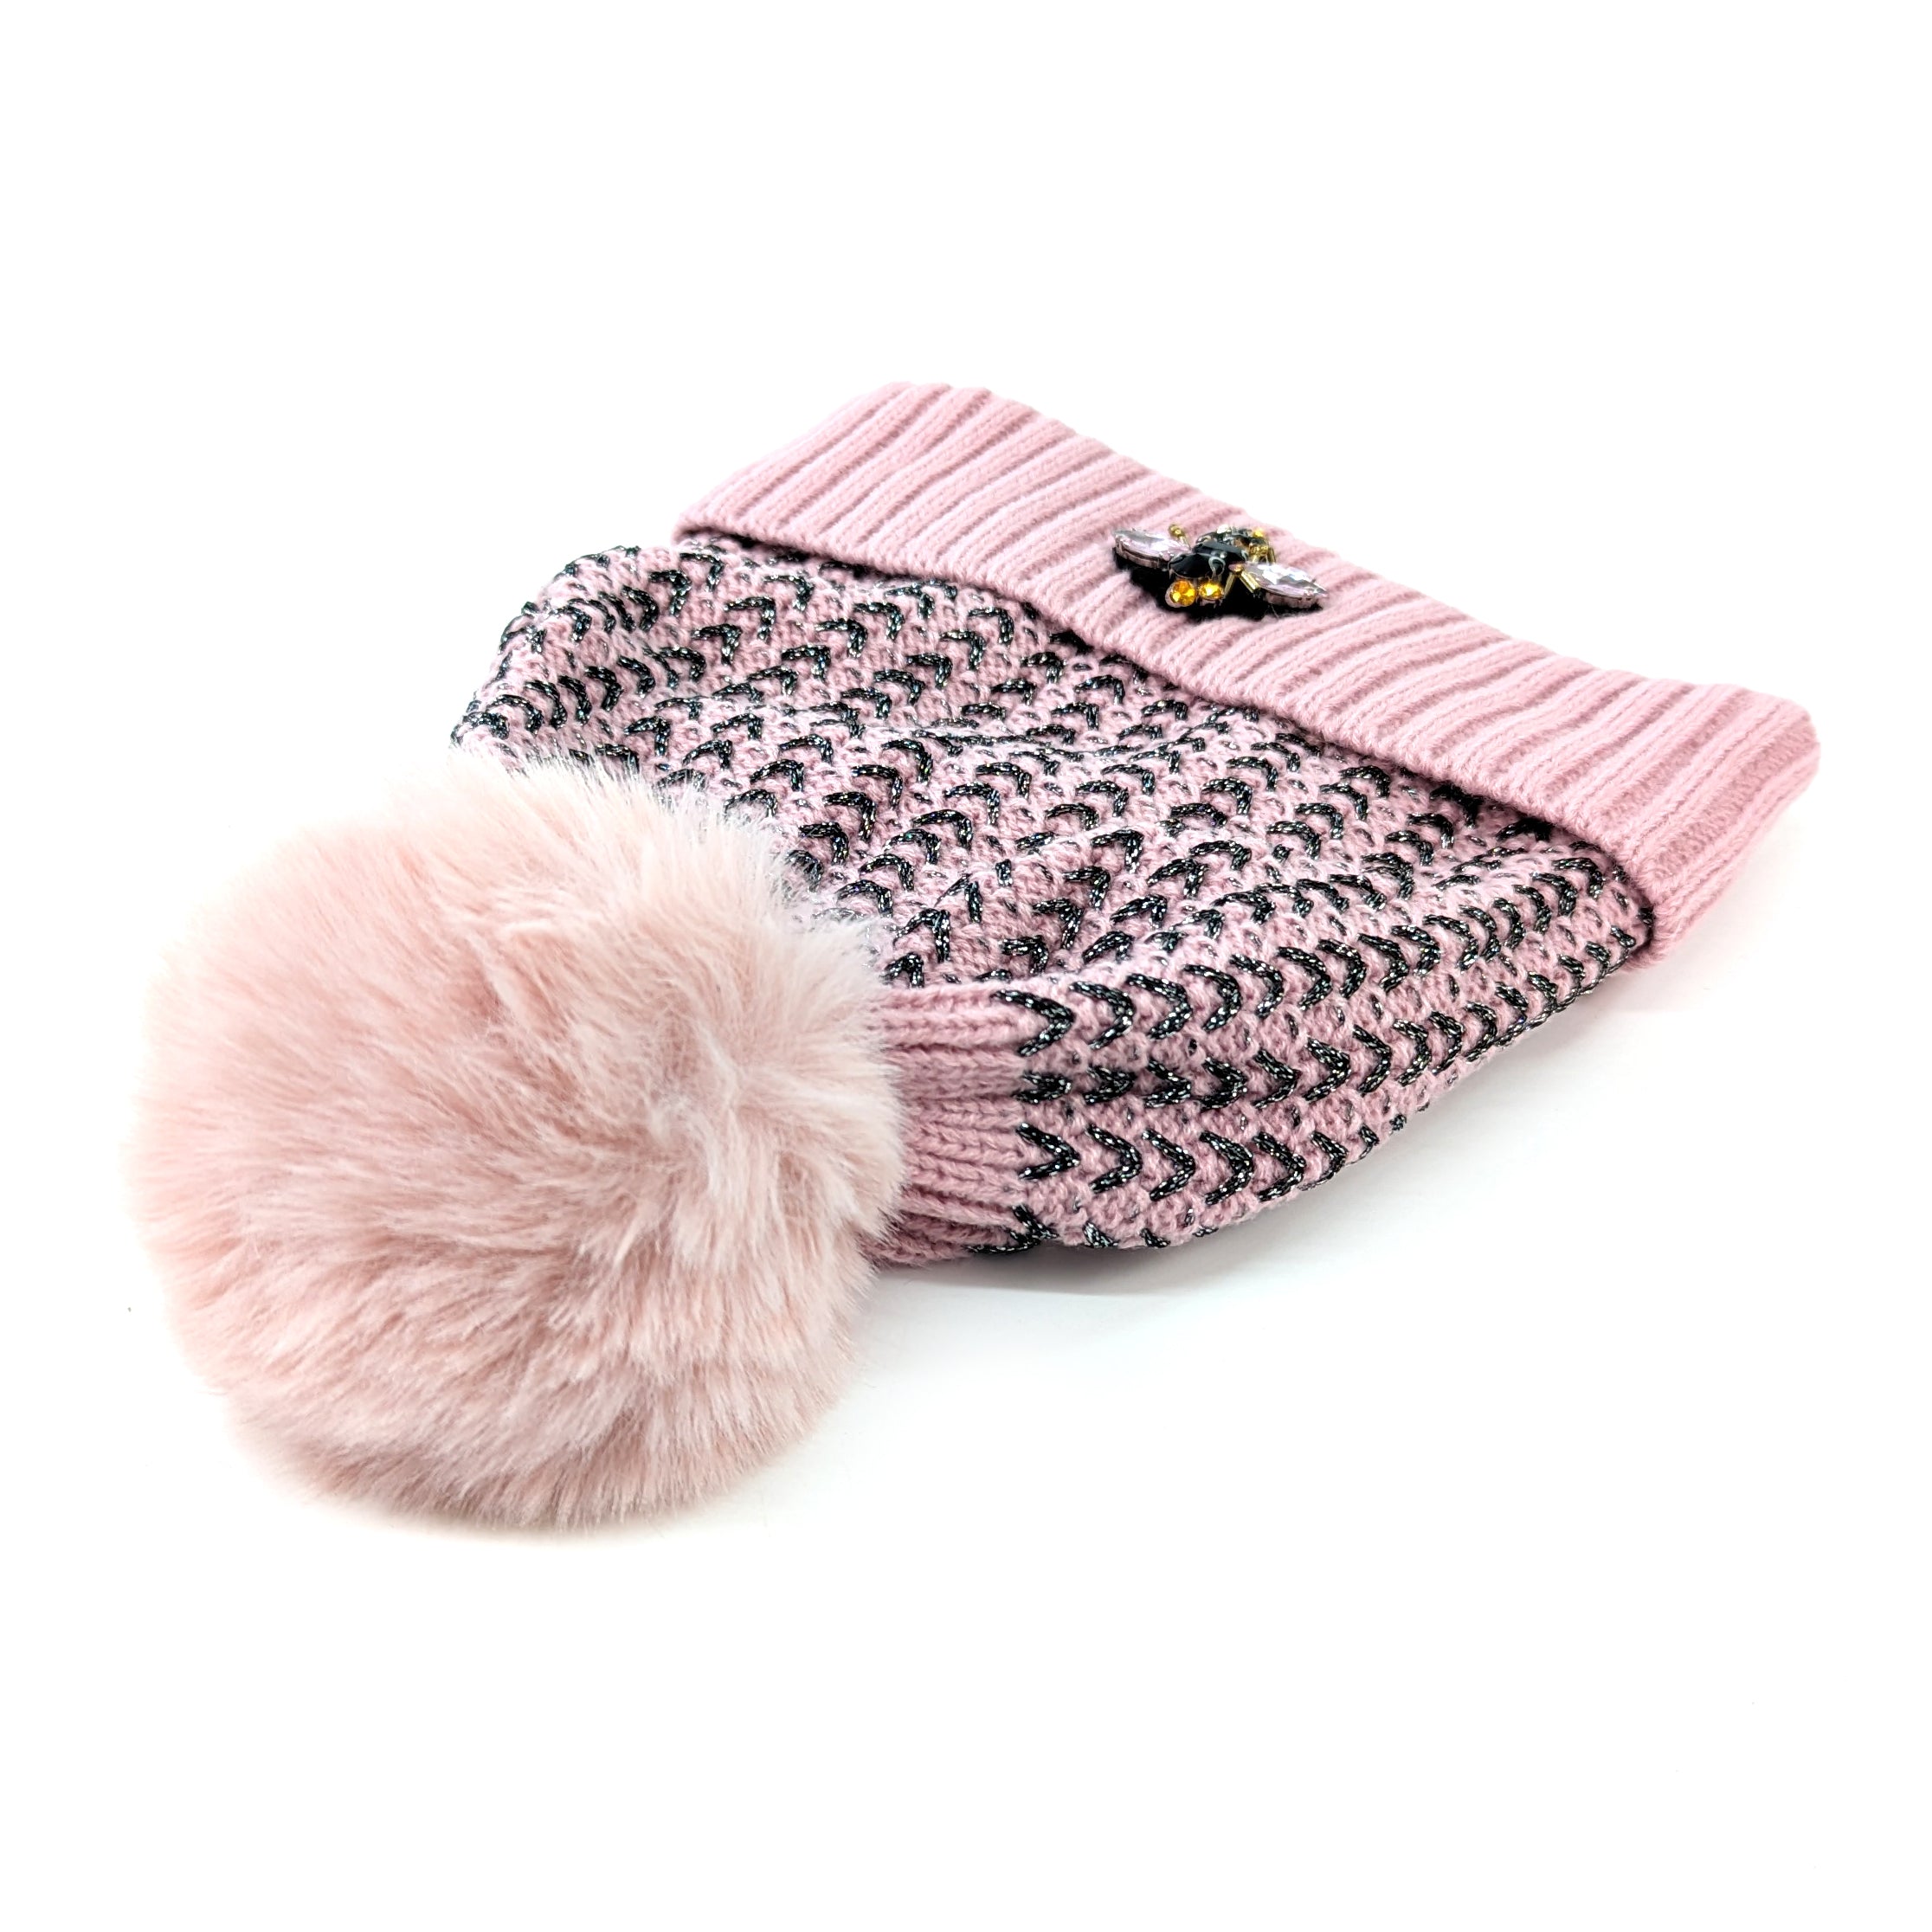 PomPom Hat with Bee Detail